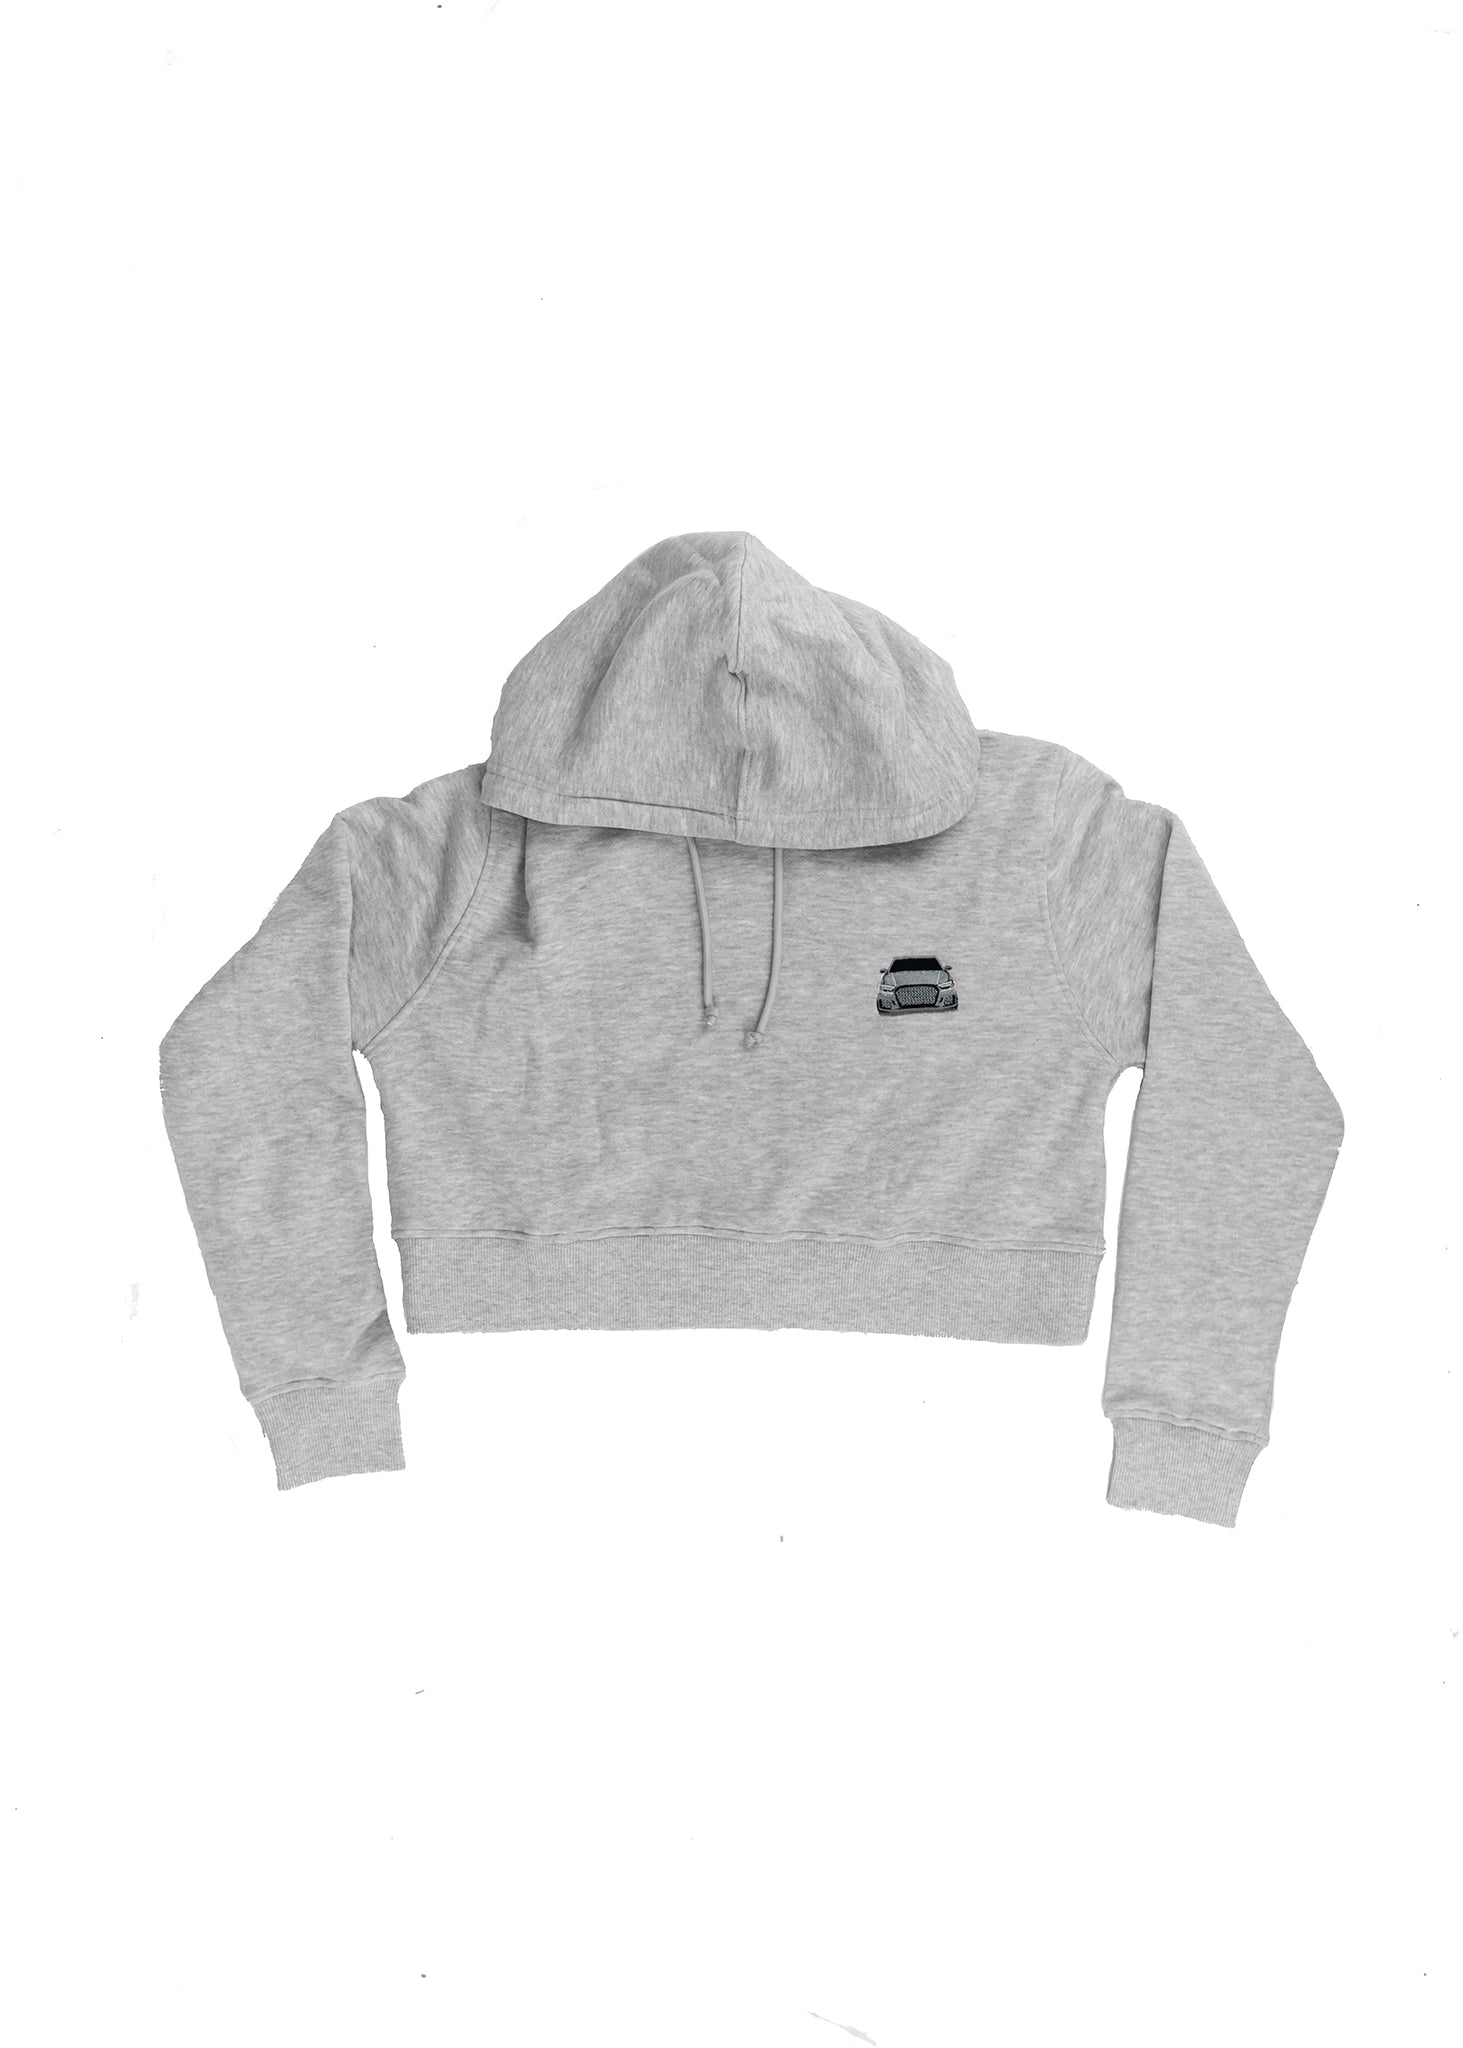 A light grey women's high quality cropped hoodie. Full size front view of the grey sweater with a nardo grey embroidered 8V RS3. Fabric composition of this cropped sweater is polyester and cotton. The material is very soft, stretchy, and non-transparent. The style of this crop hoodie is a crewneck, drawstring hoodie, hooded, long sleeve, cropped, with embroidery on the left chest.